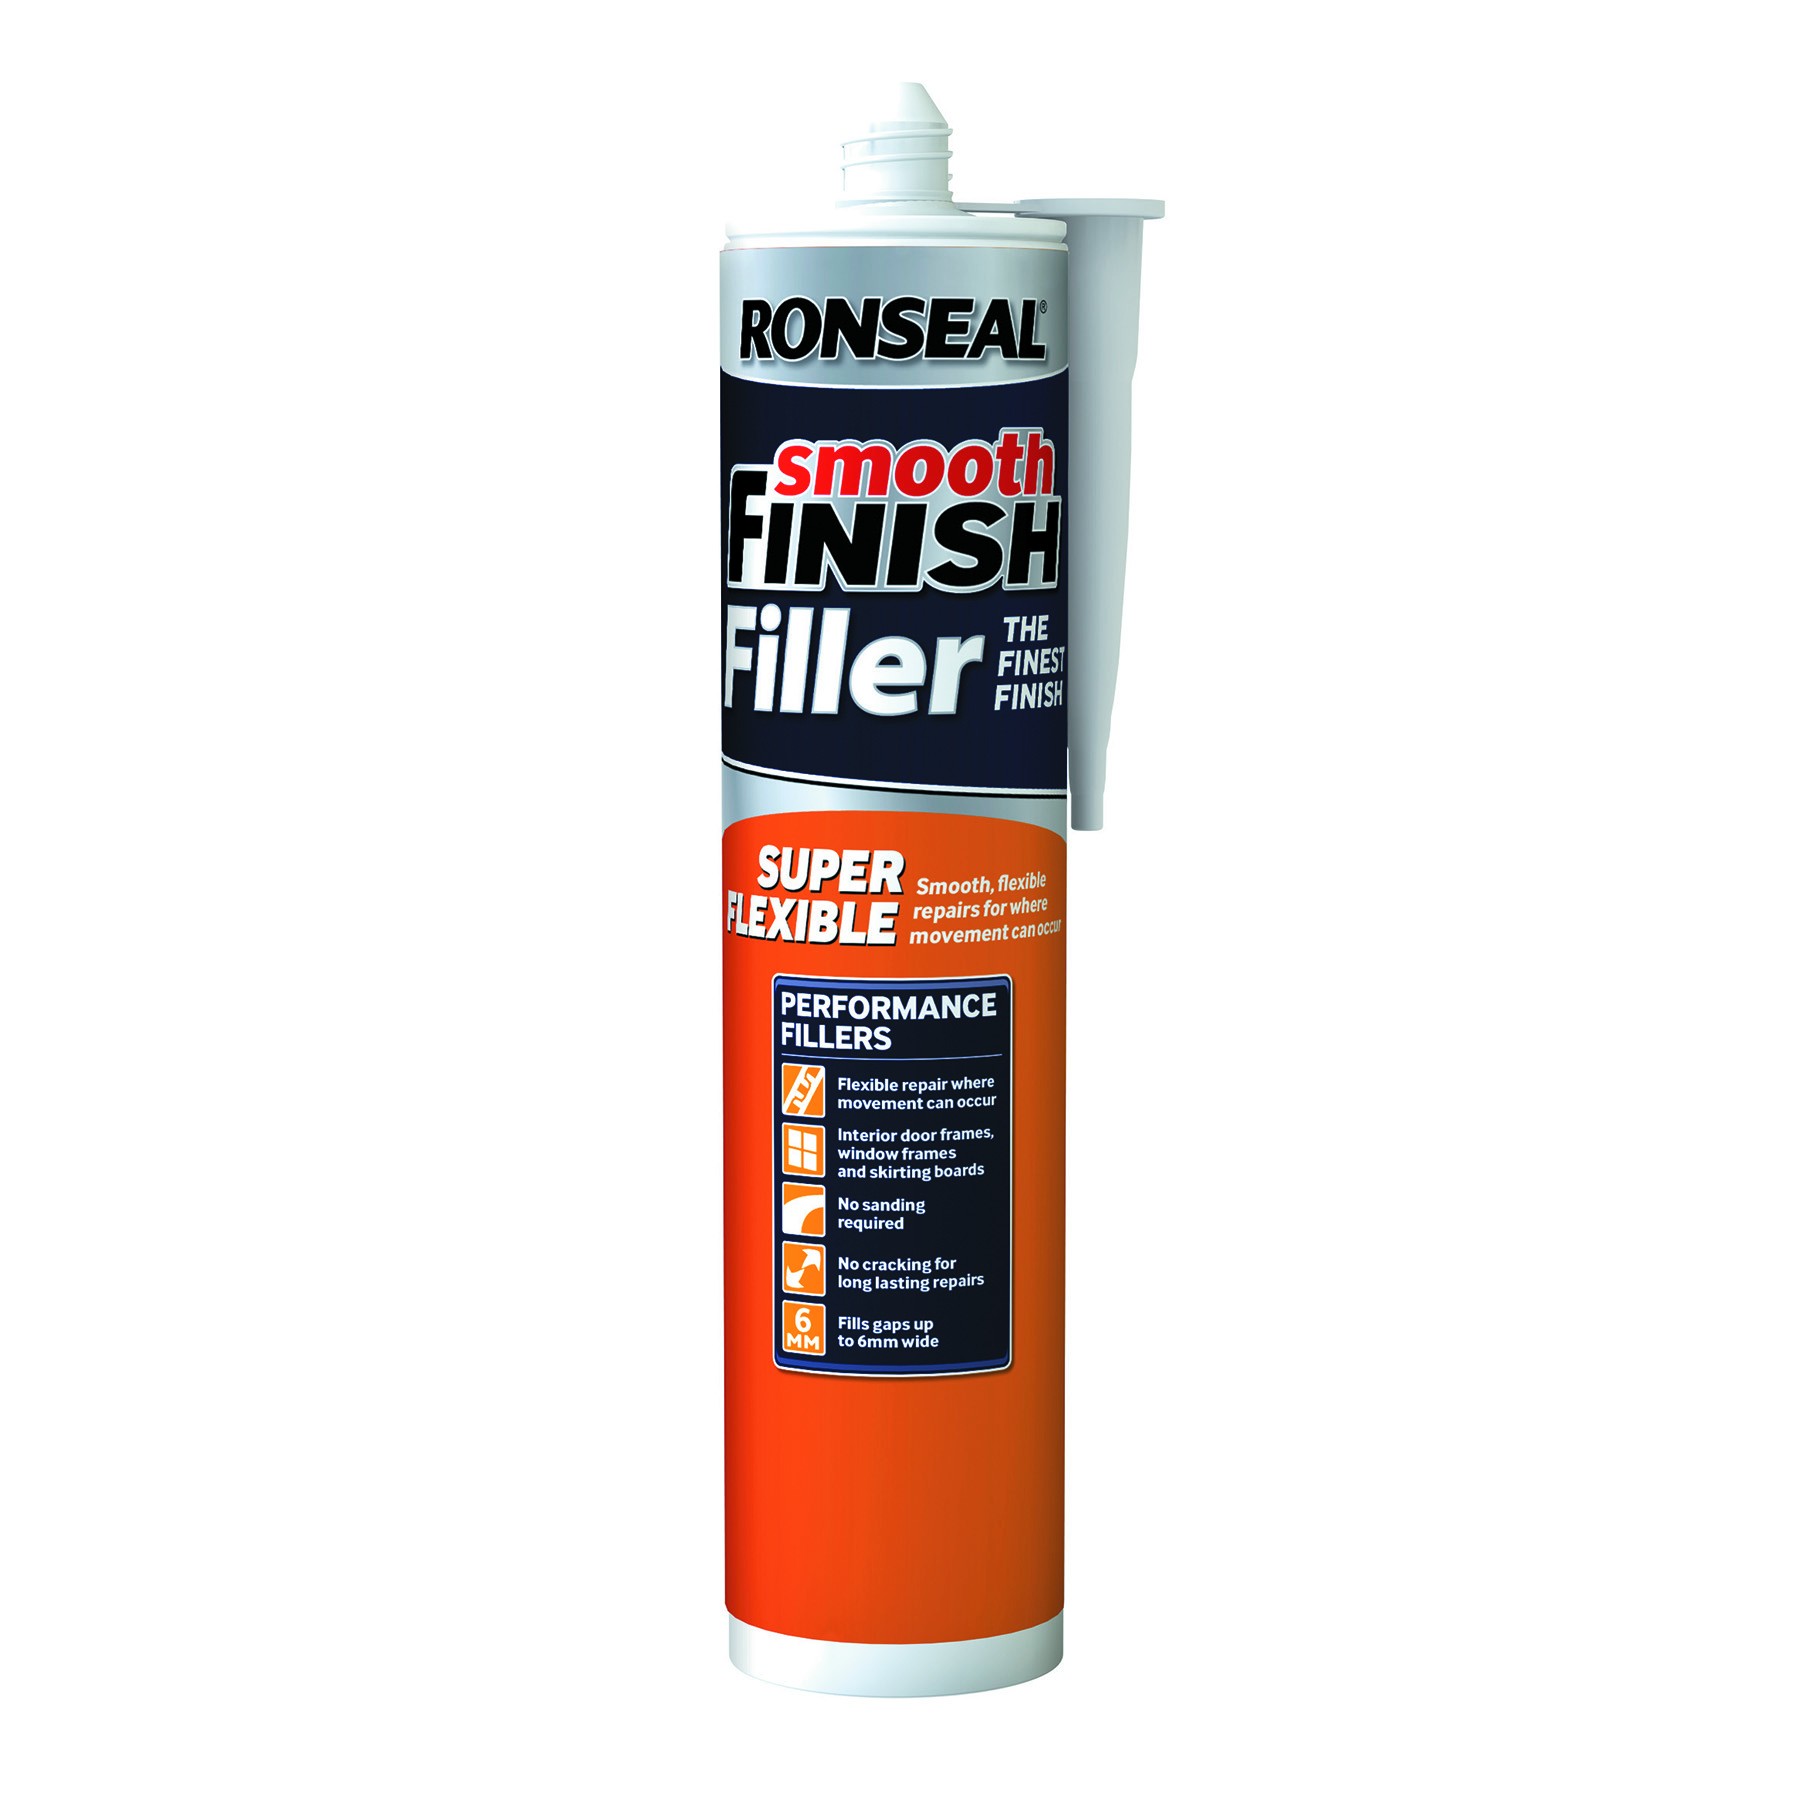 Ronseal Smooth Finish Super Flexible Wall Filler 330g [RONS36559]